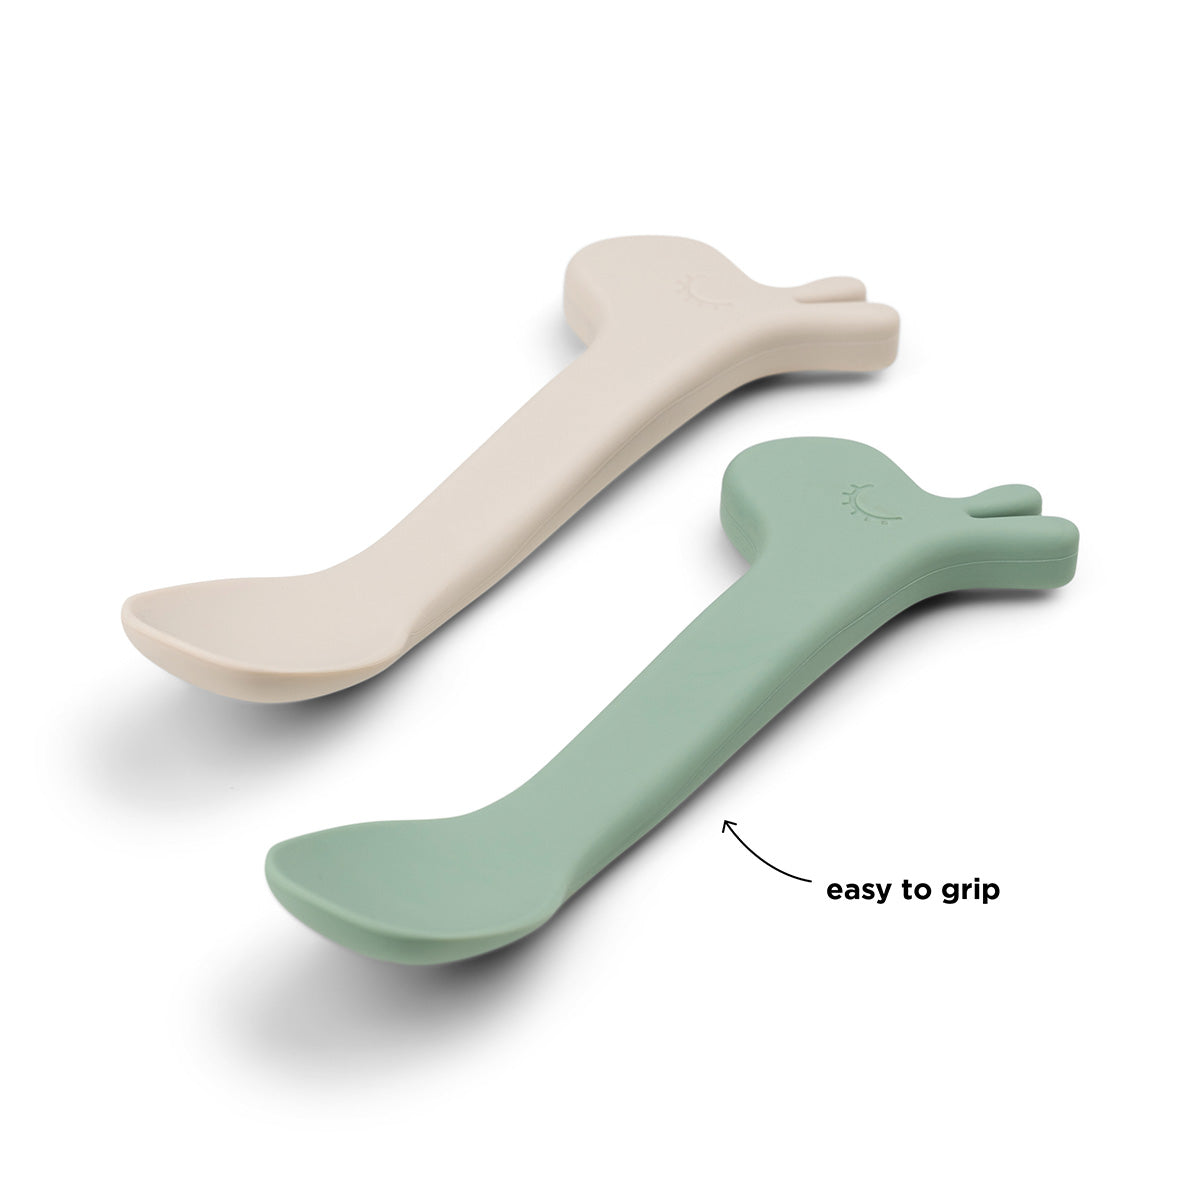 https://cdn.shopify.com/s/files/1/0565/6808/6571/products/Silicone-spoon-2-pack-Lalee-Green-Function-4-PS.jpg?v=1675332552&width=1200